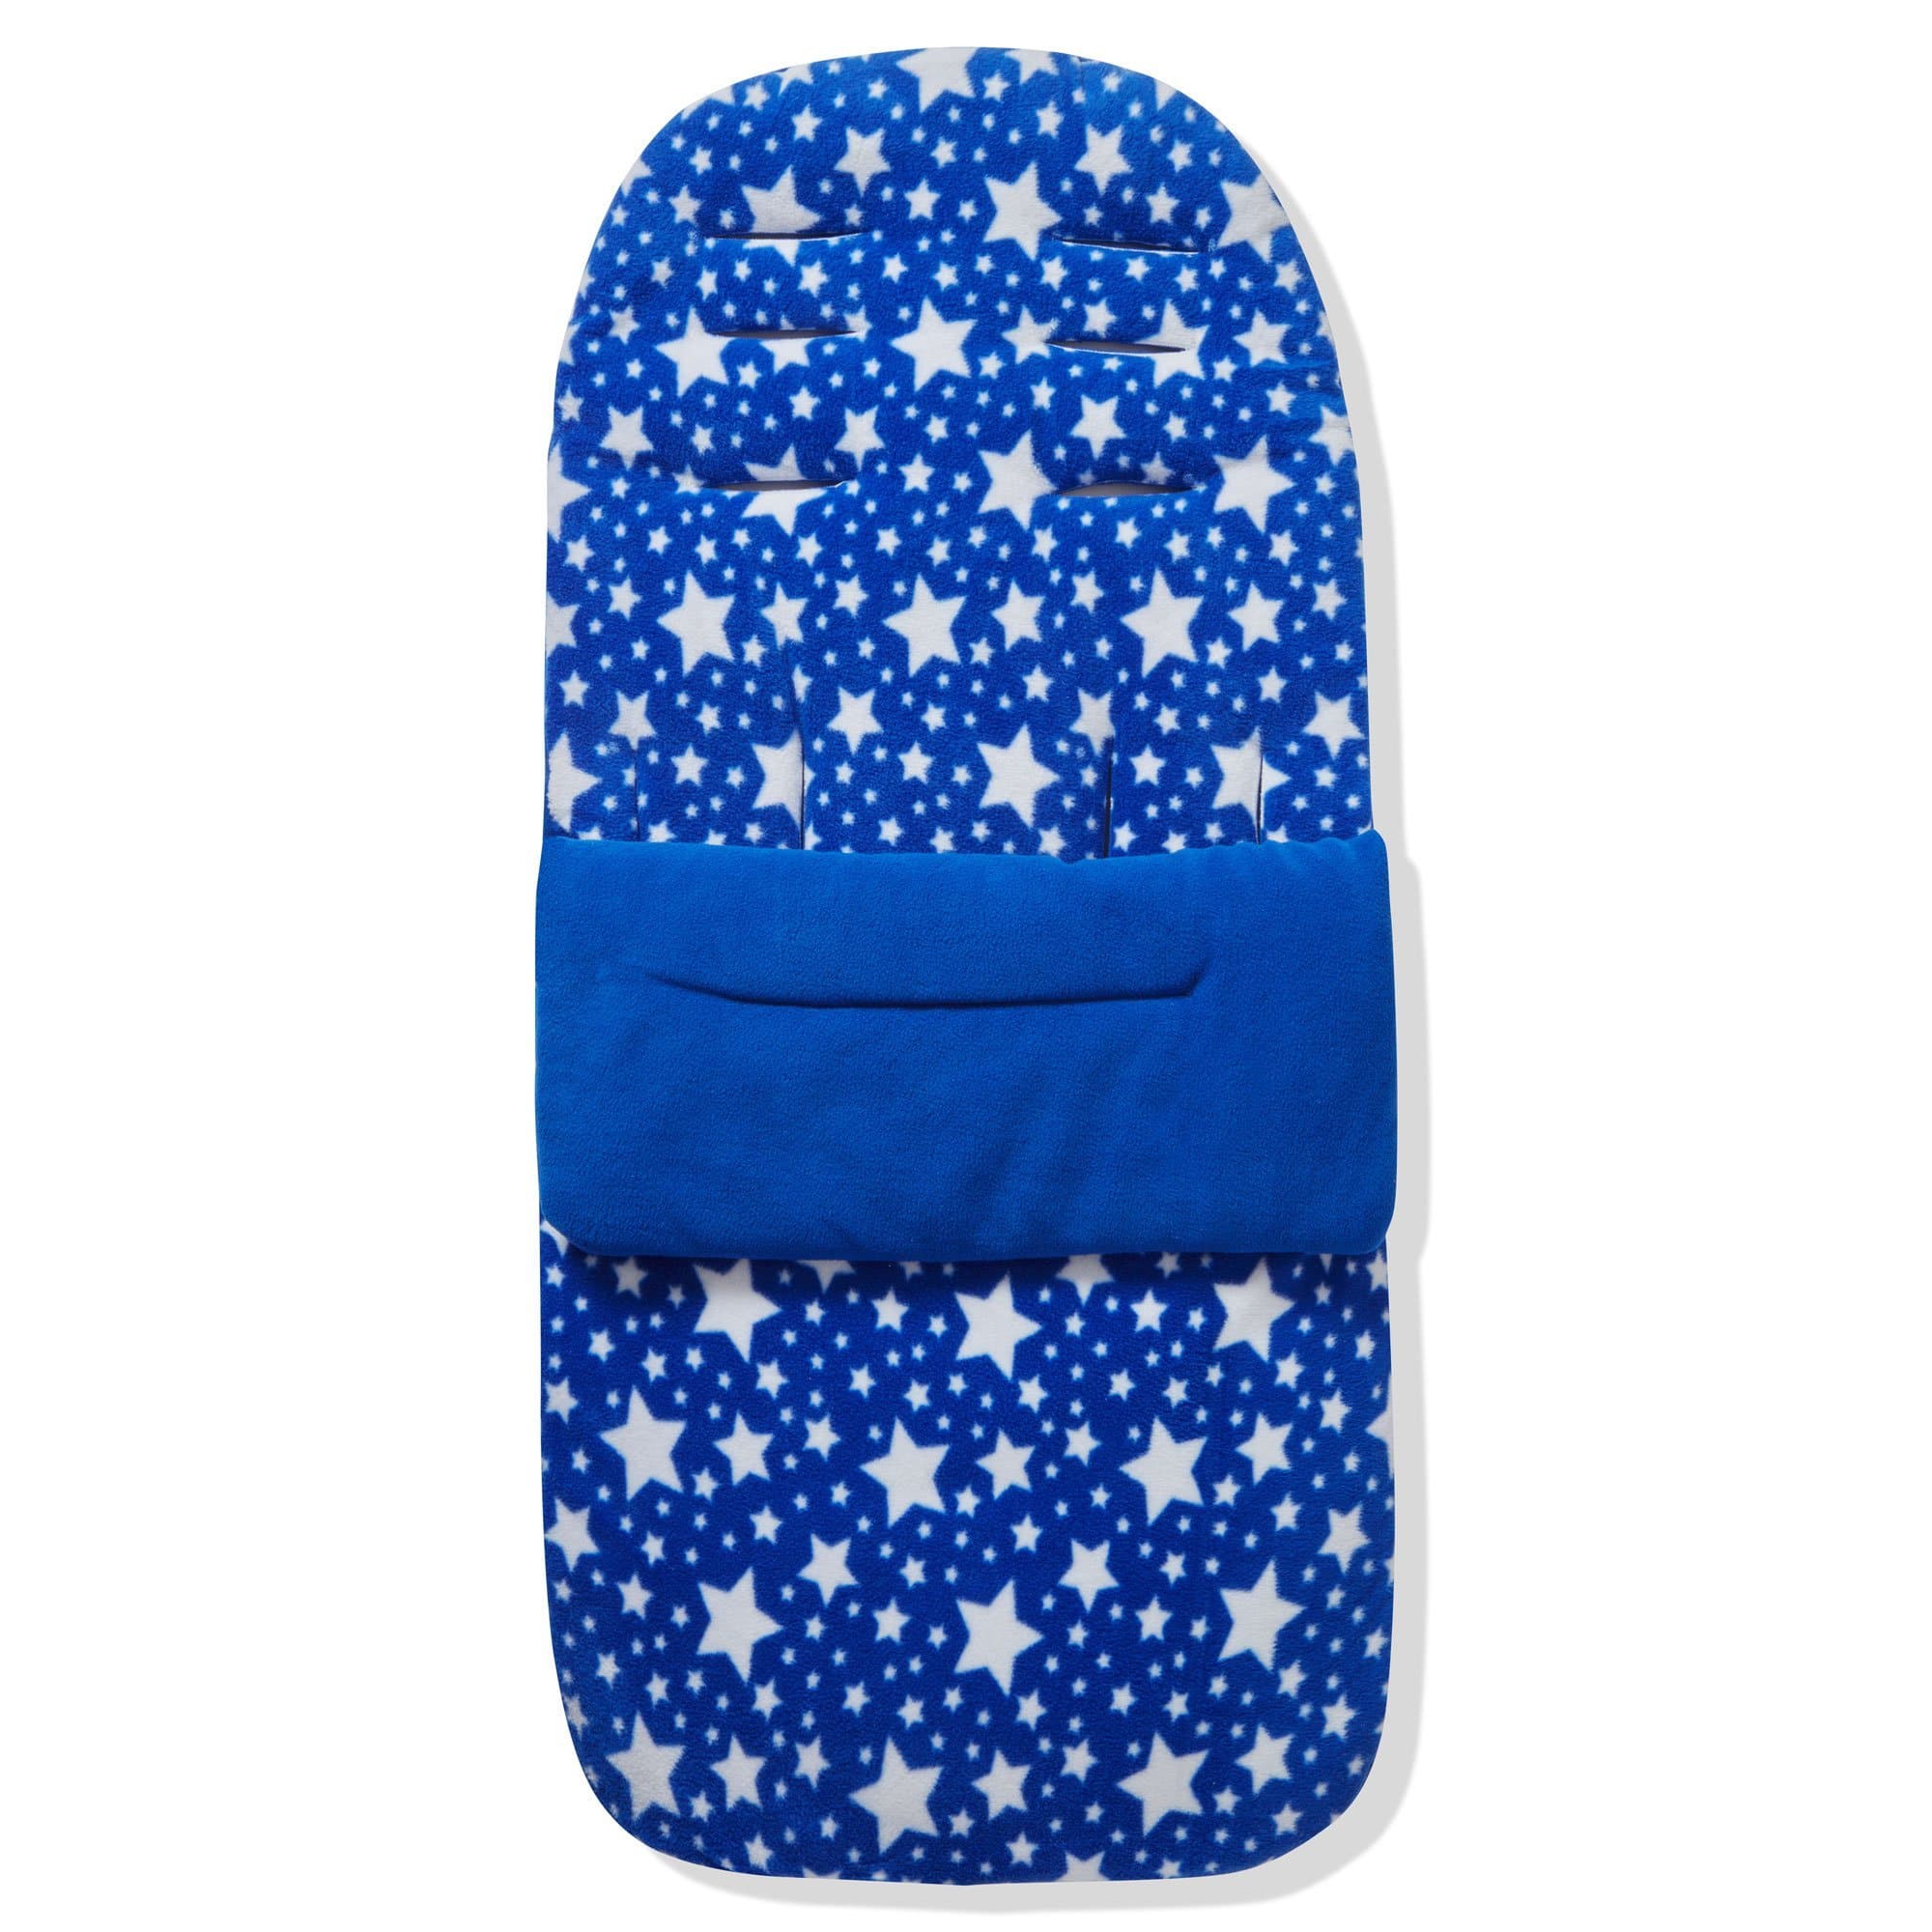 Fleece Footmuff / Cosy Toes Compatible with Nuna - Blue Star / Fits All Models | For Your Little One